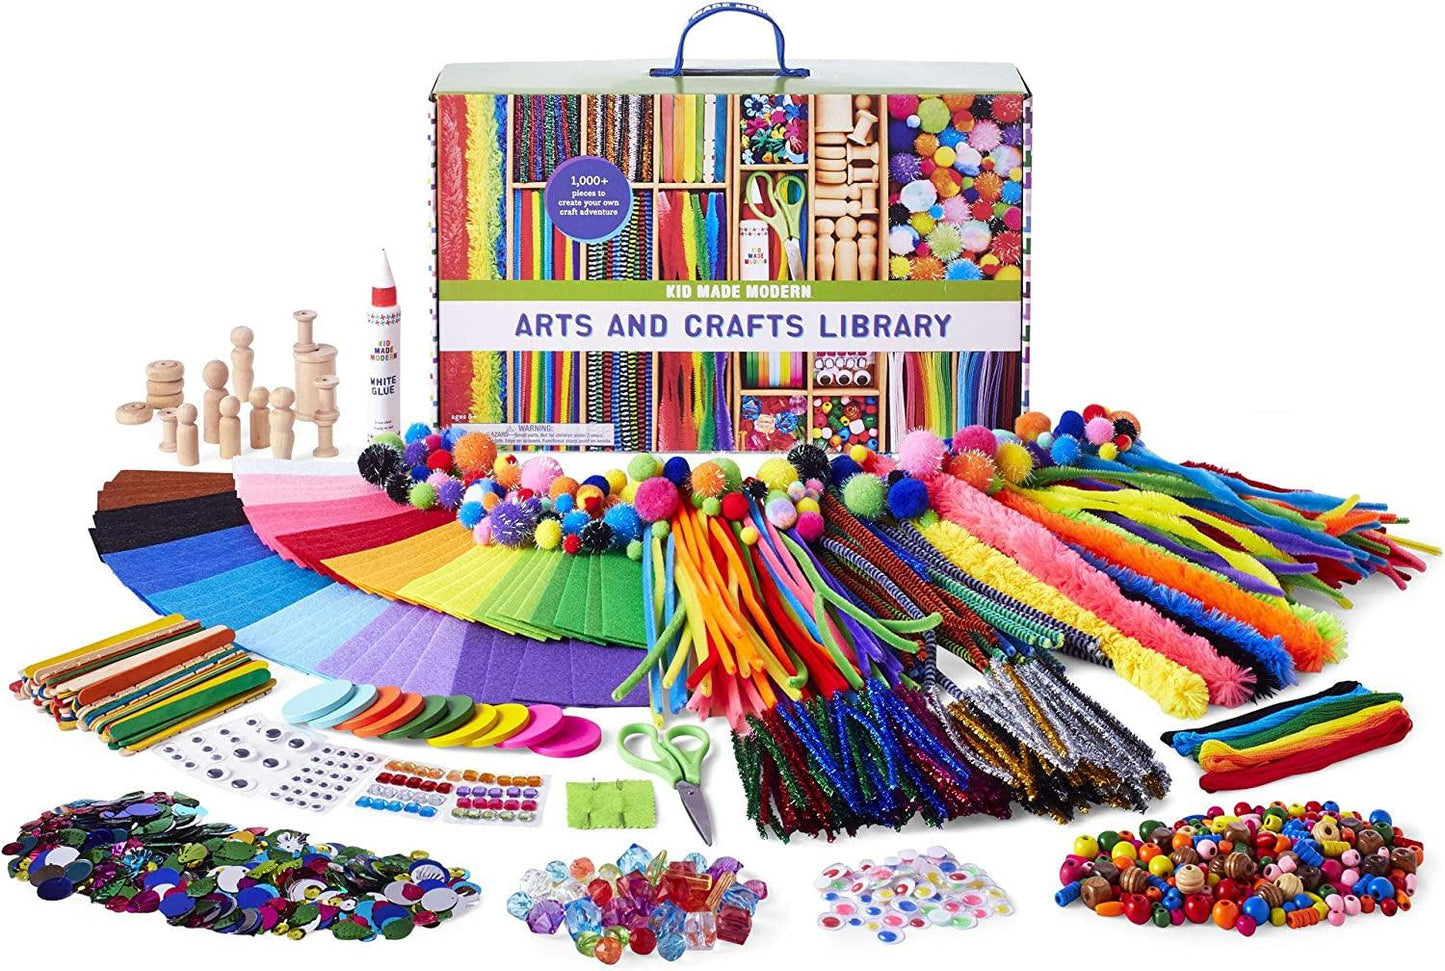 Arts & Crafts Supply Library Craft Supplies Learning Activities Kids Brain Boosting Crafting Kit Coloring Kit - WoodArtSupply